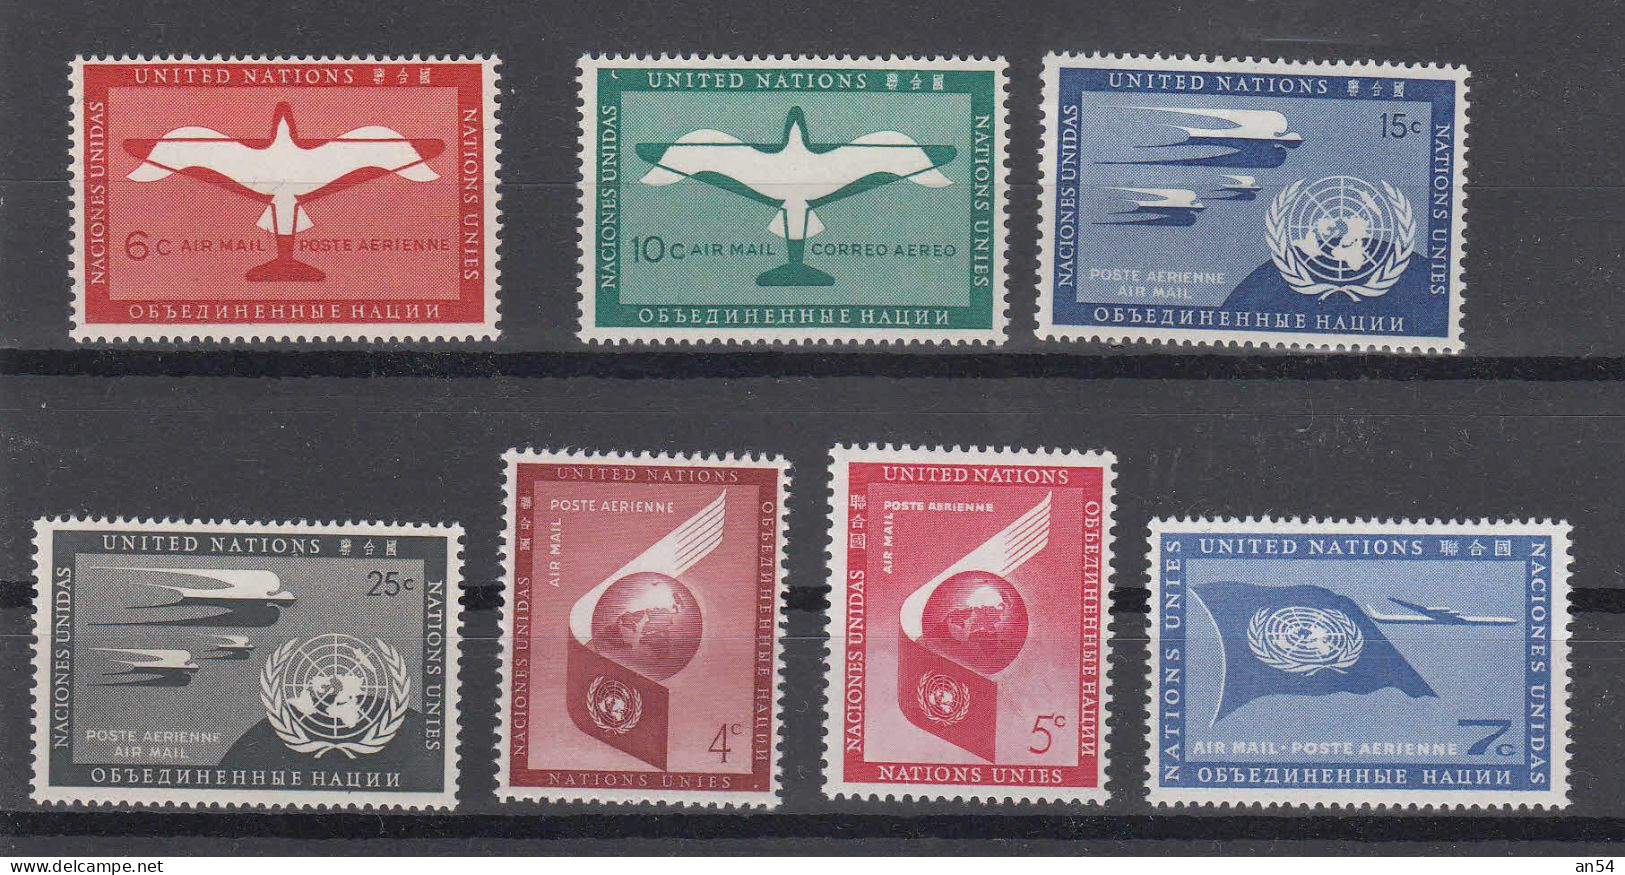 NATIONS  UNIES  NEW-YORK   PA  1951/59  N° 1 à 7    NEUFS**   CATALOGUE YVERT&TELLIER - Airmail